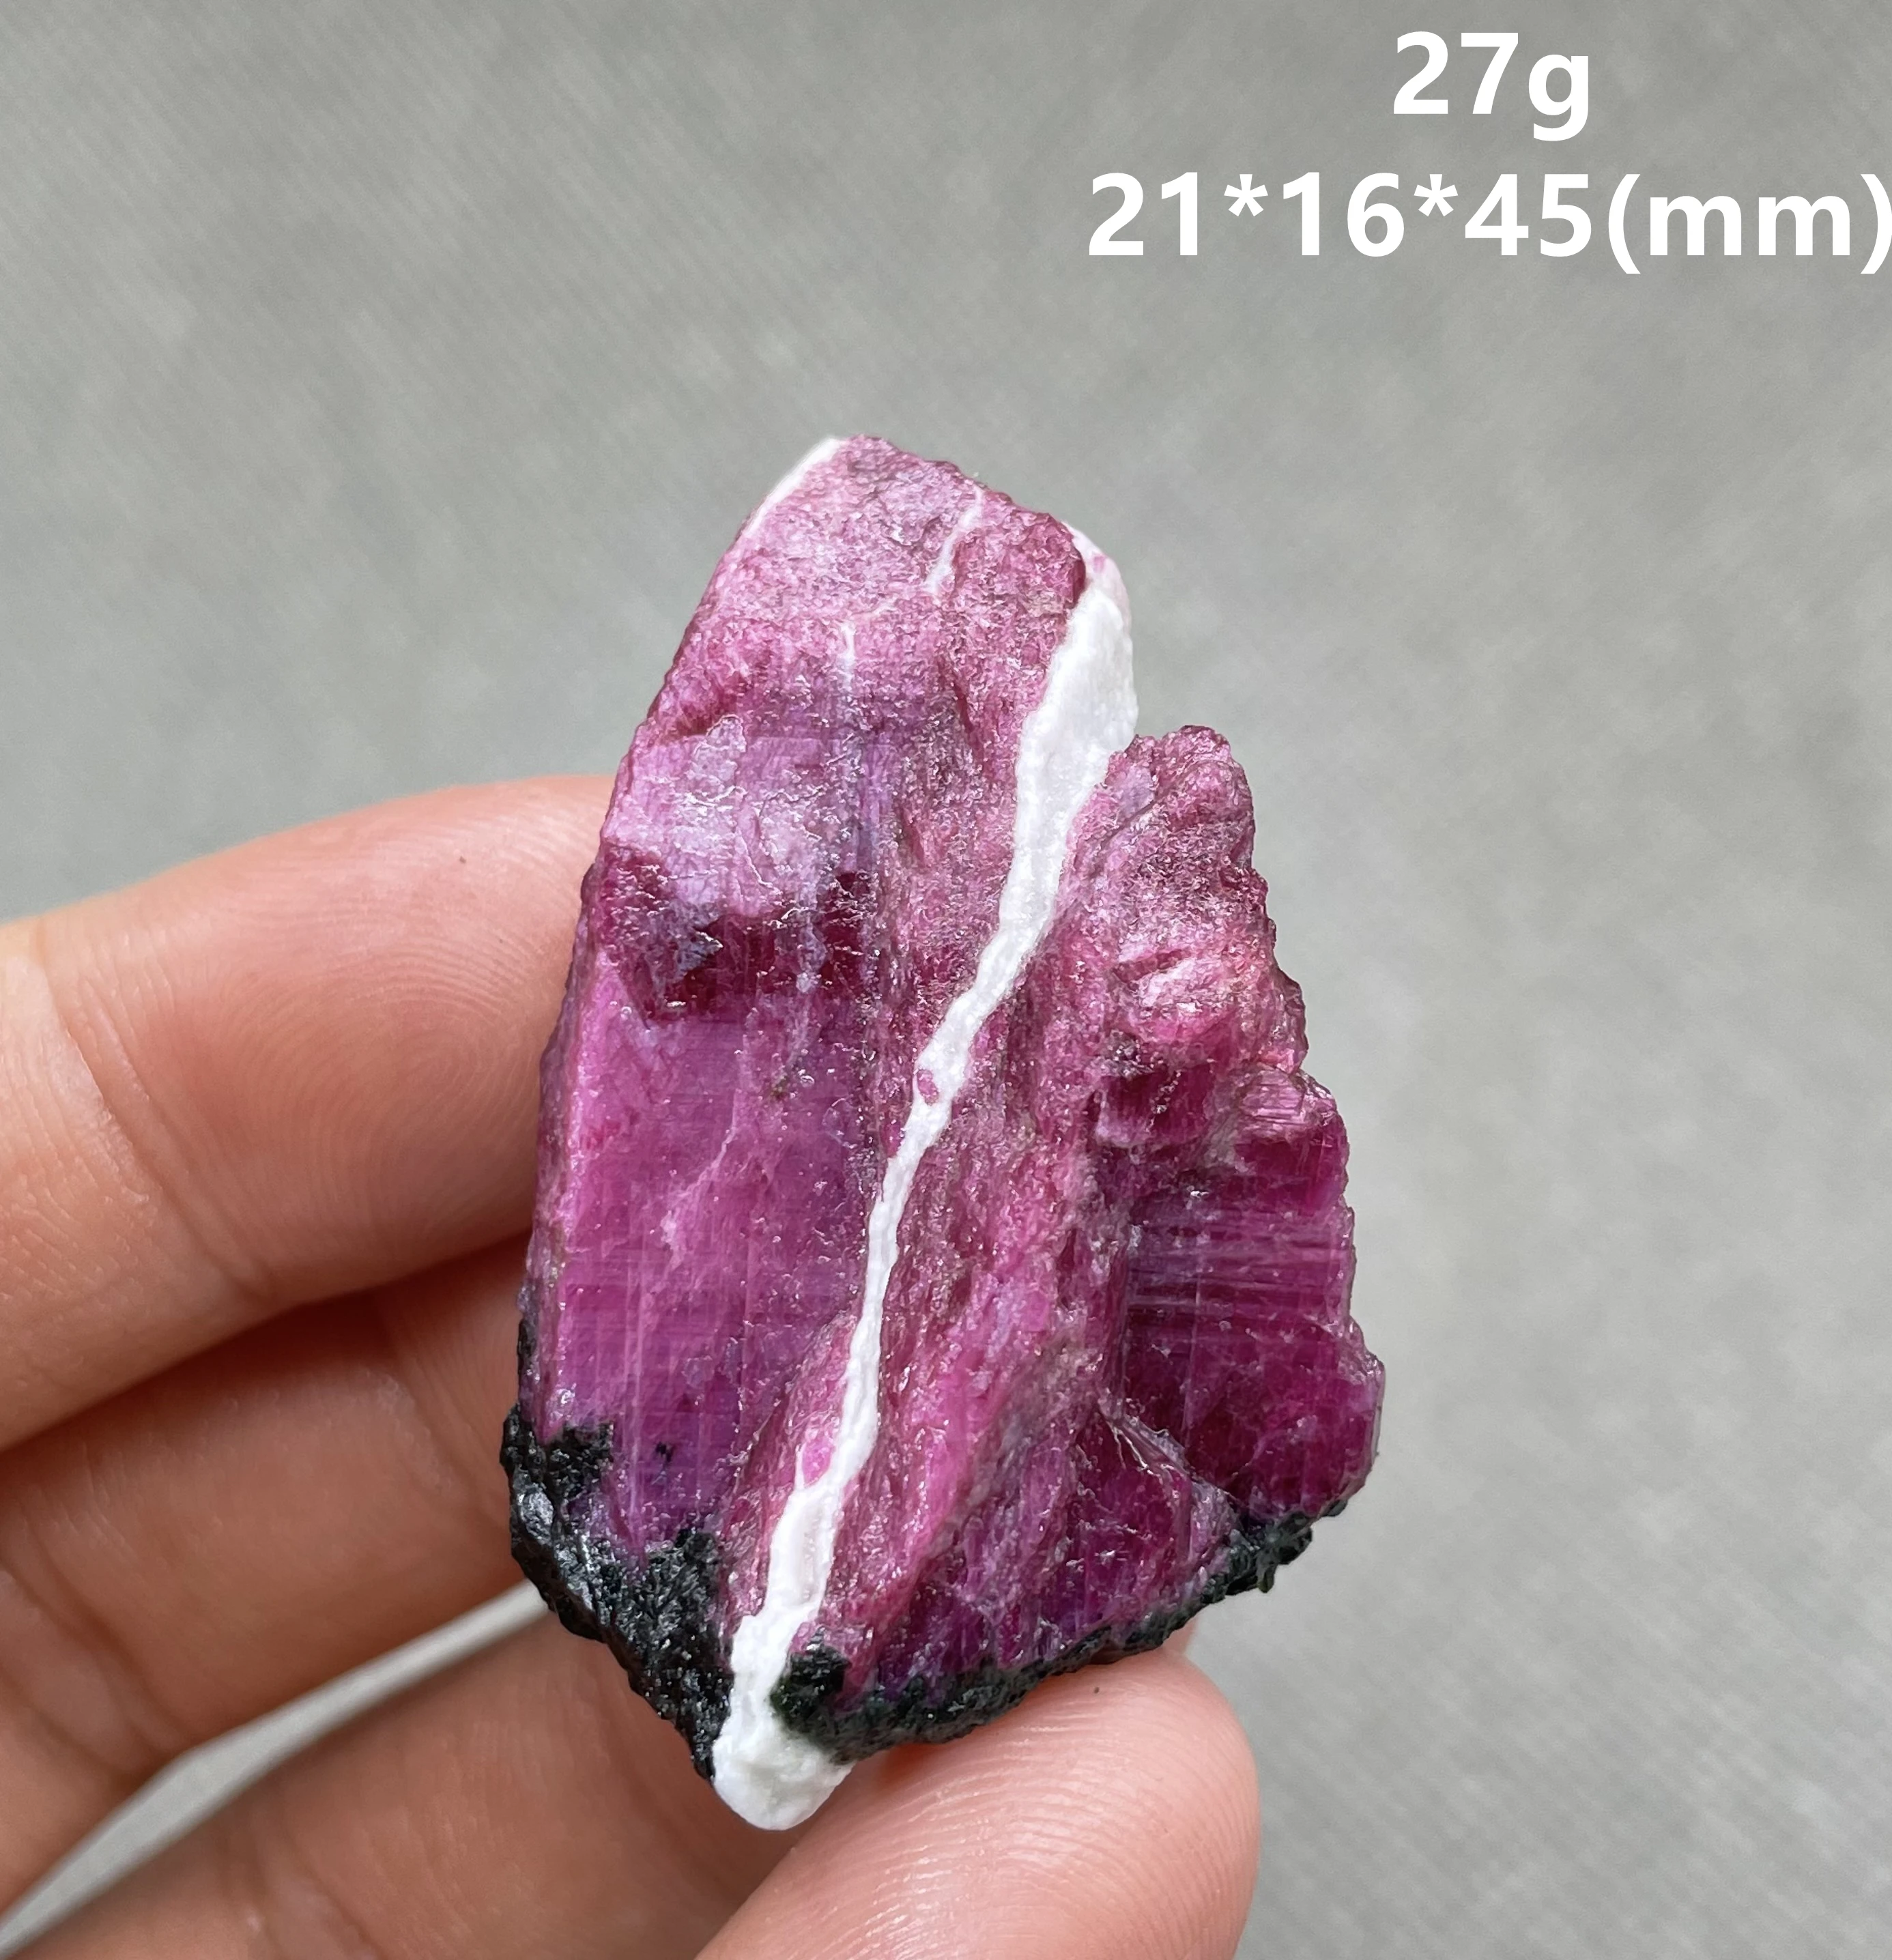 

NEW! BEST! 100% natural Myanmar Fluorescent Ruby rough mineral stones and crystals healing crystals quartz gemstones